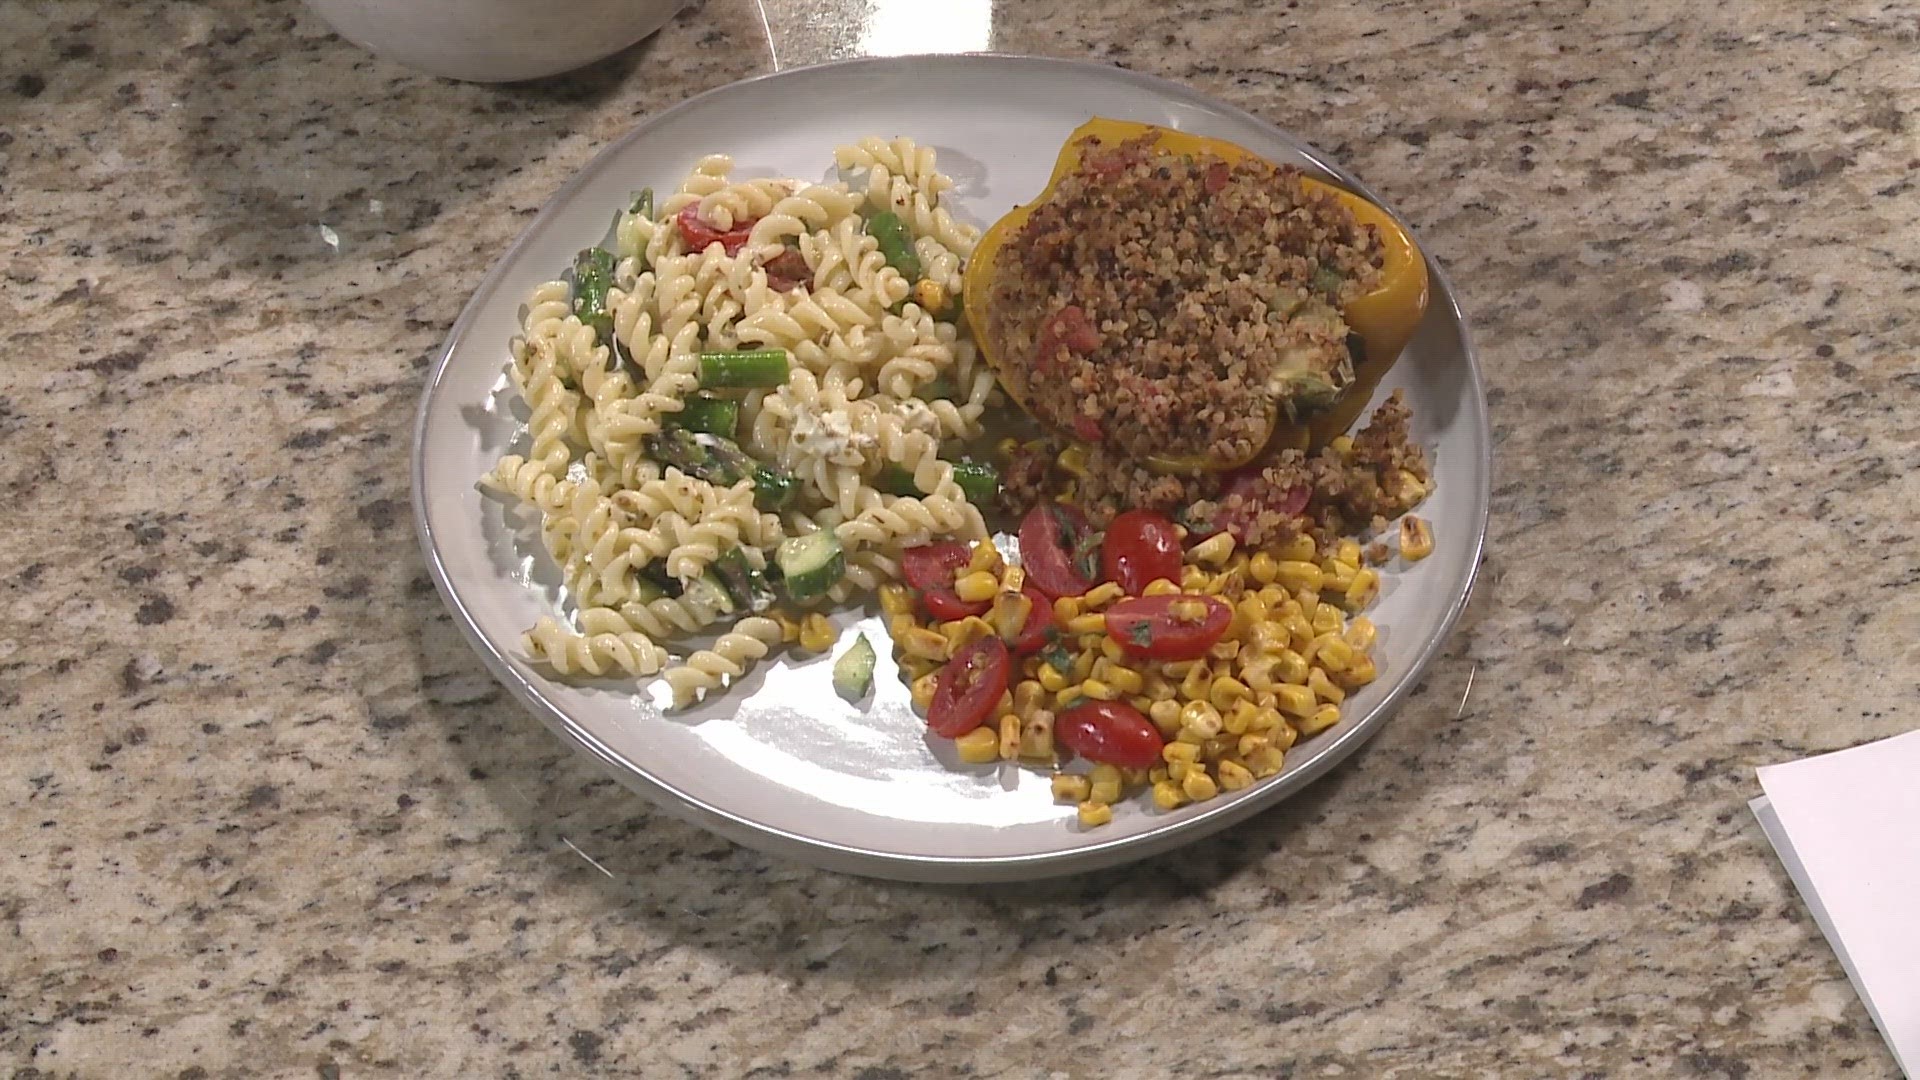 March is National Nutrition Month. A registered dietician explains the farm-to-table movement.